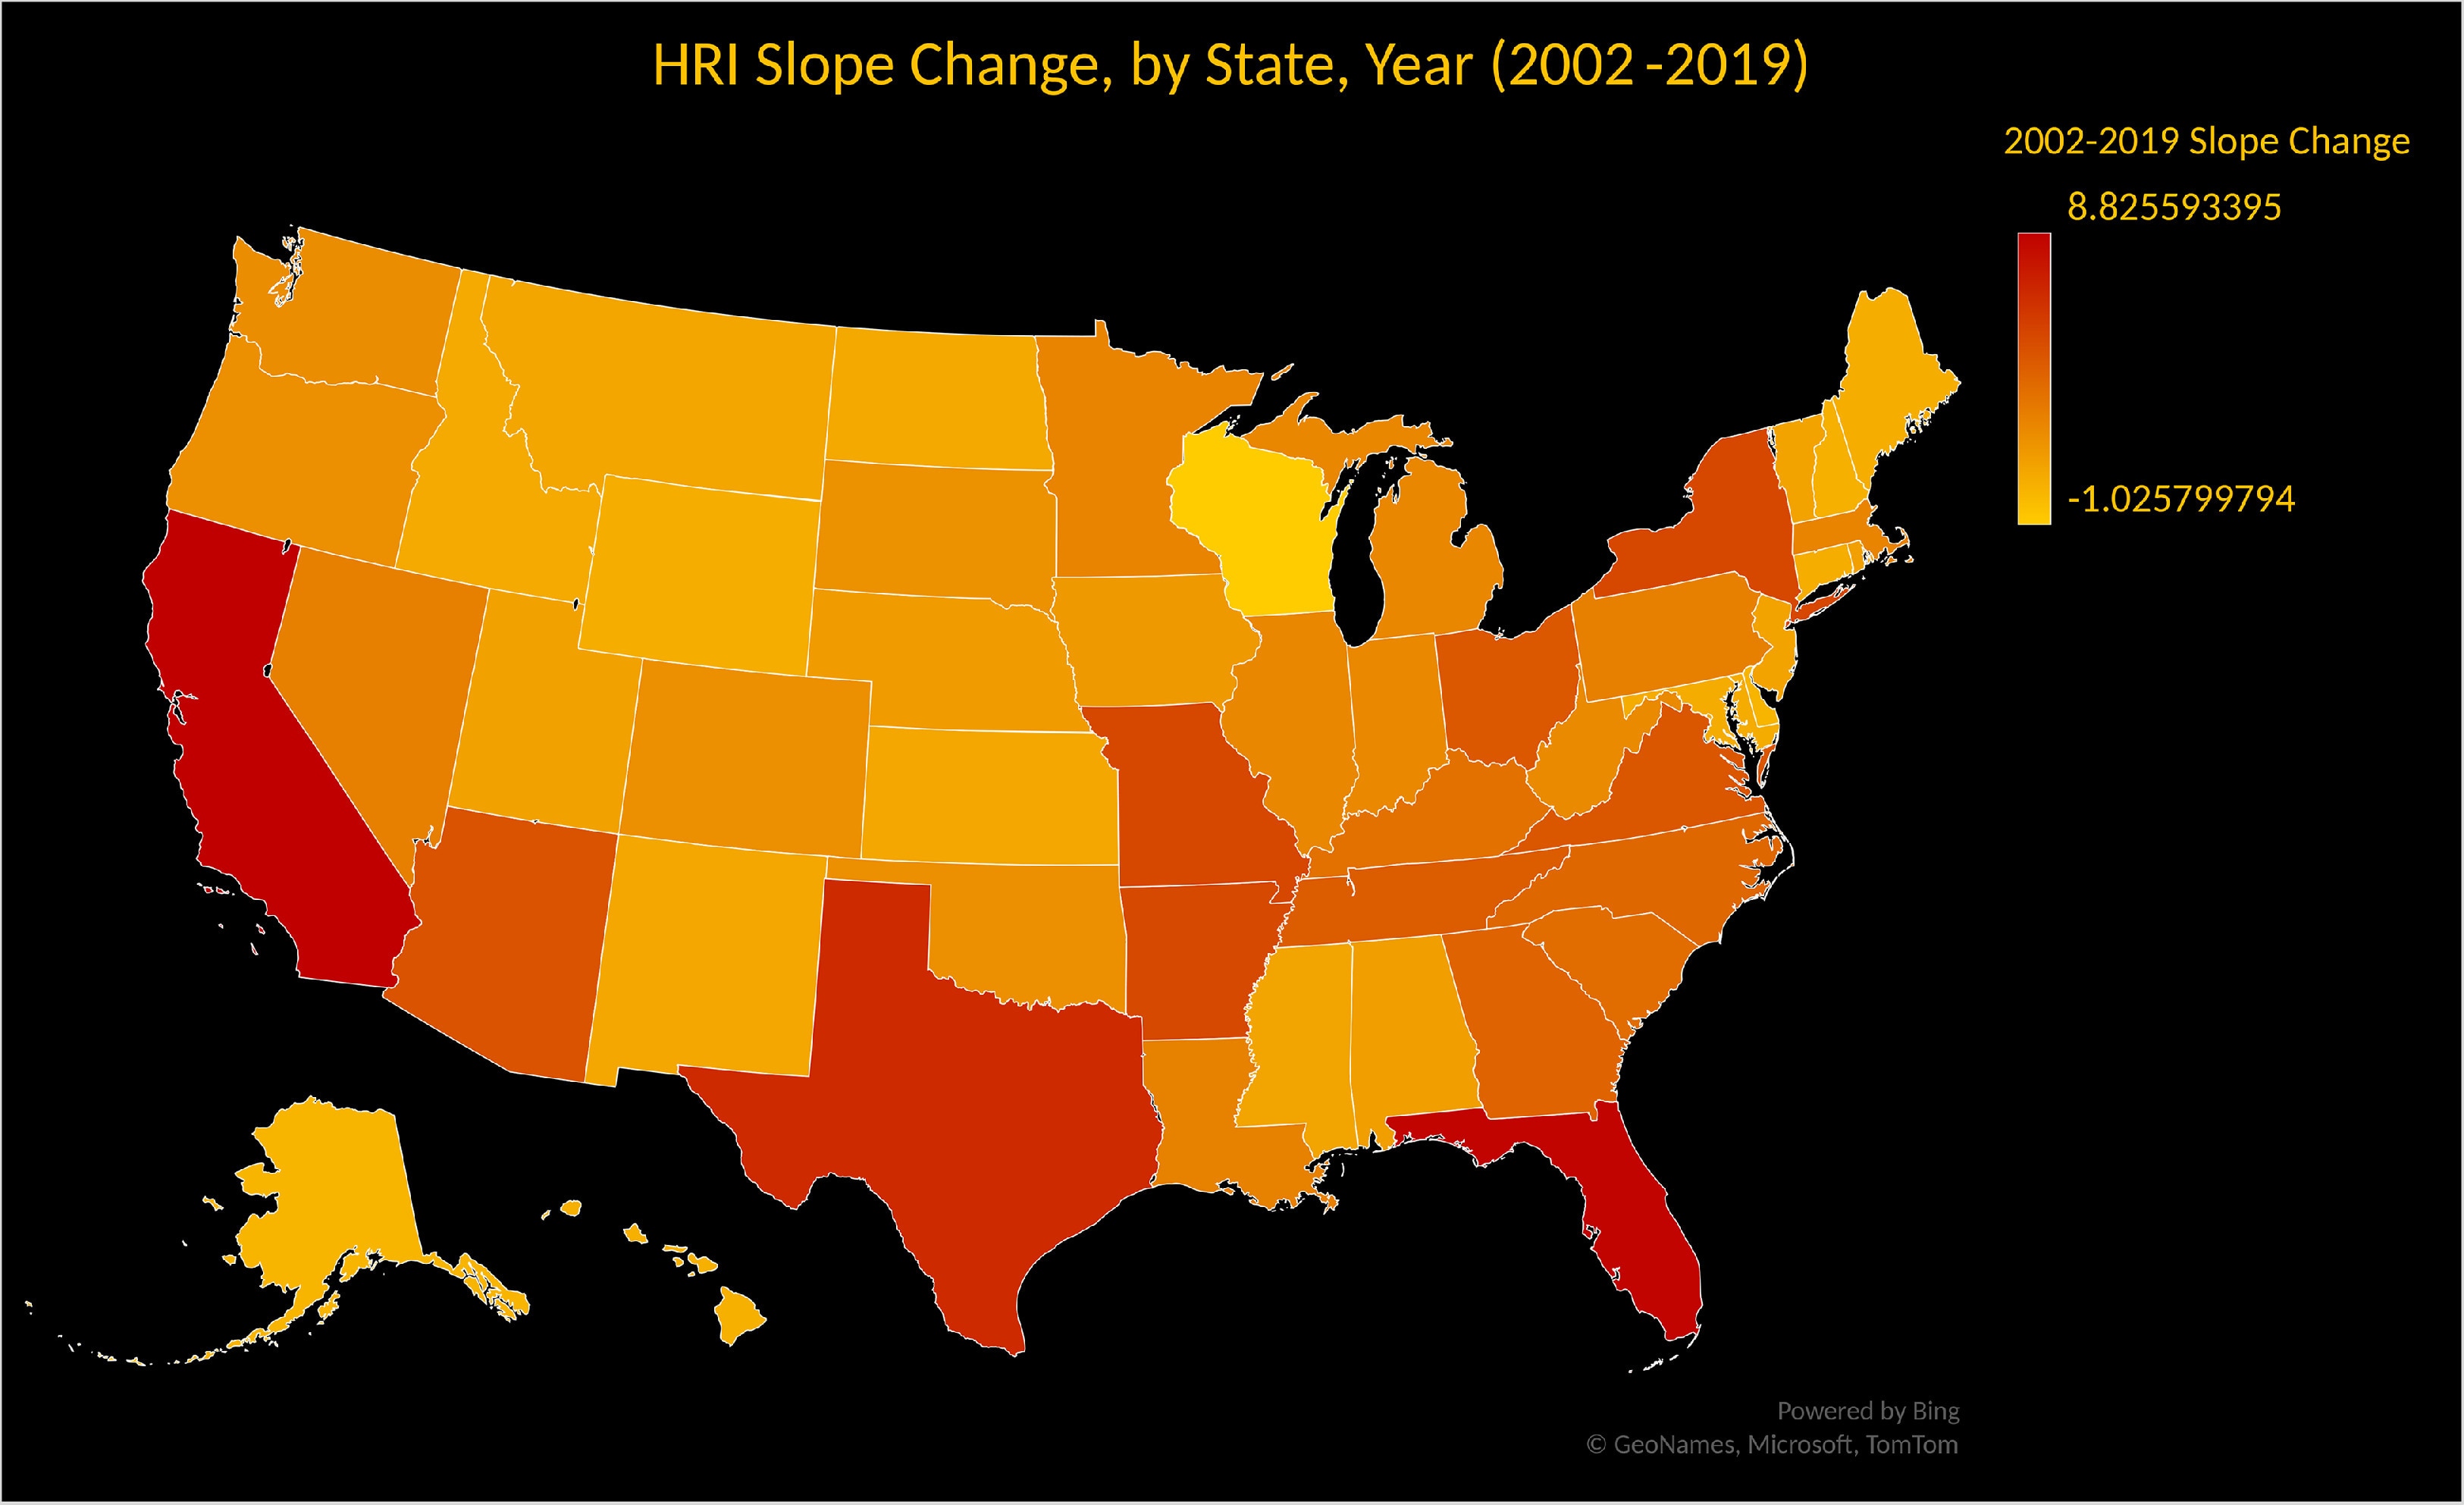 Heat map of all 50 U.S. states and District of Columbia. States with the largest increase in heat-related illness diagnoses over the assessment period are red, with less dramatic increases represented in shades of orange.